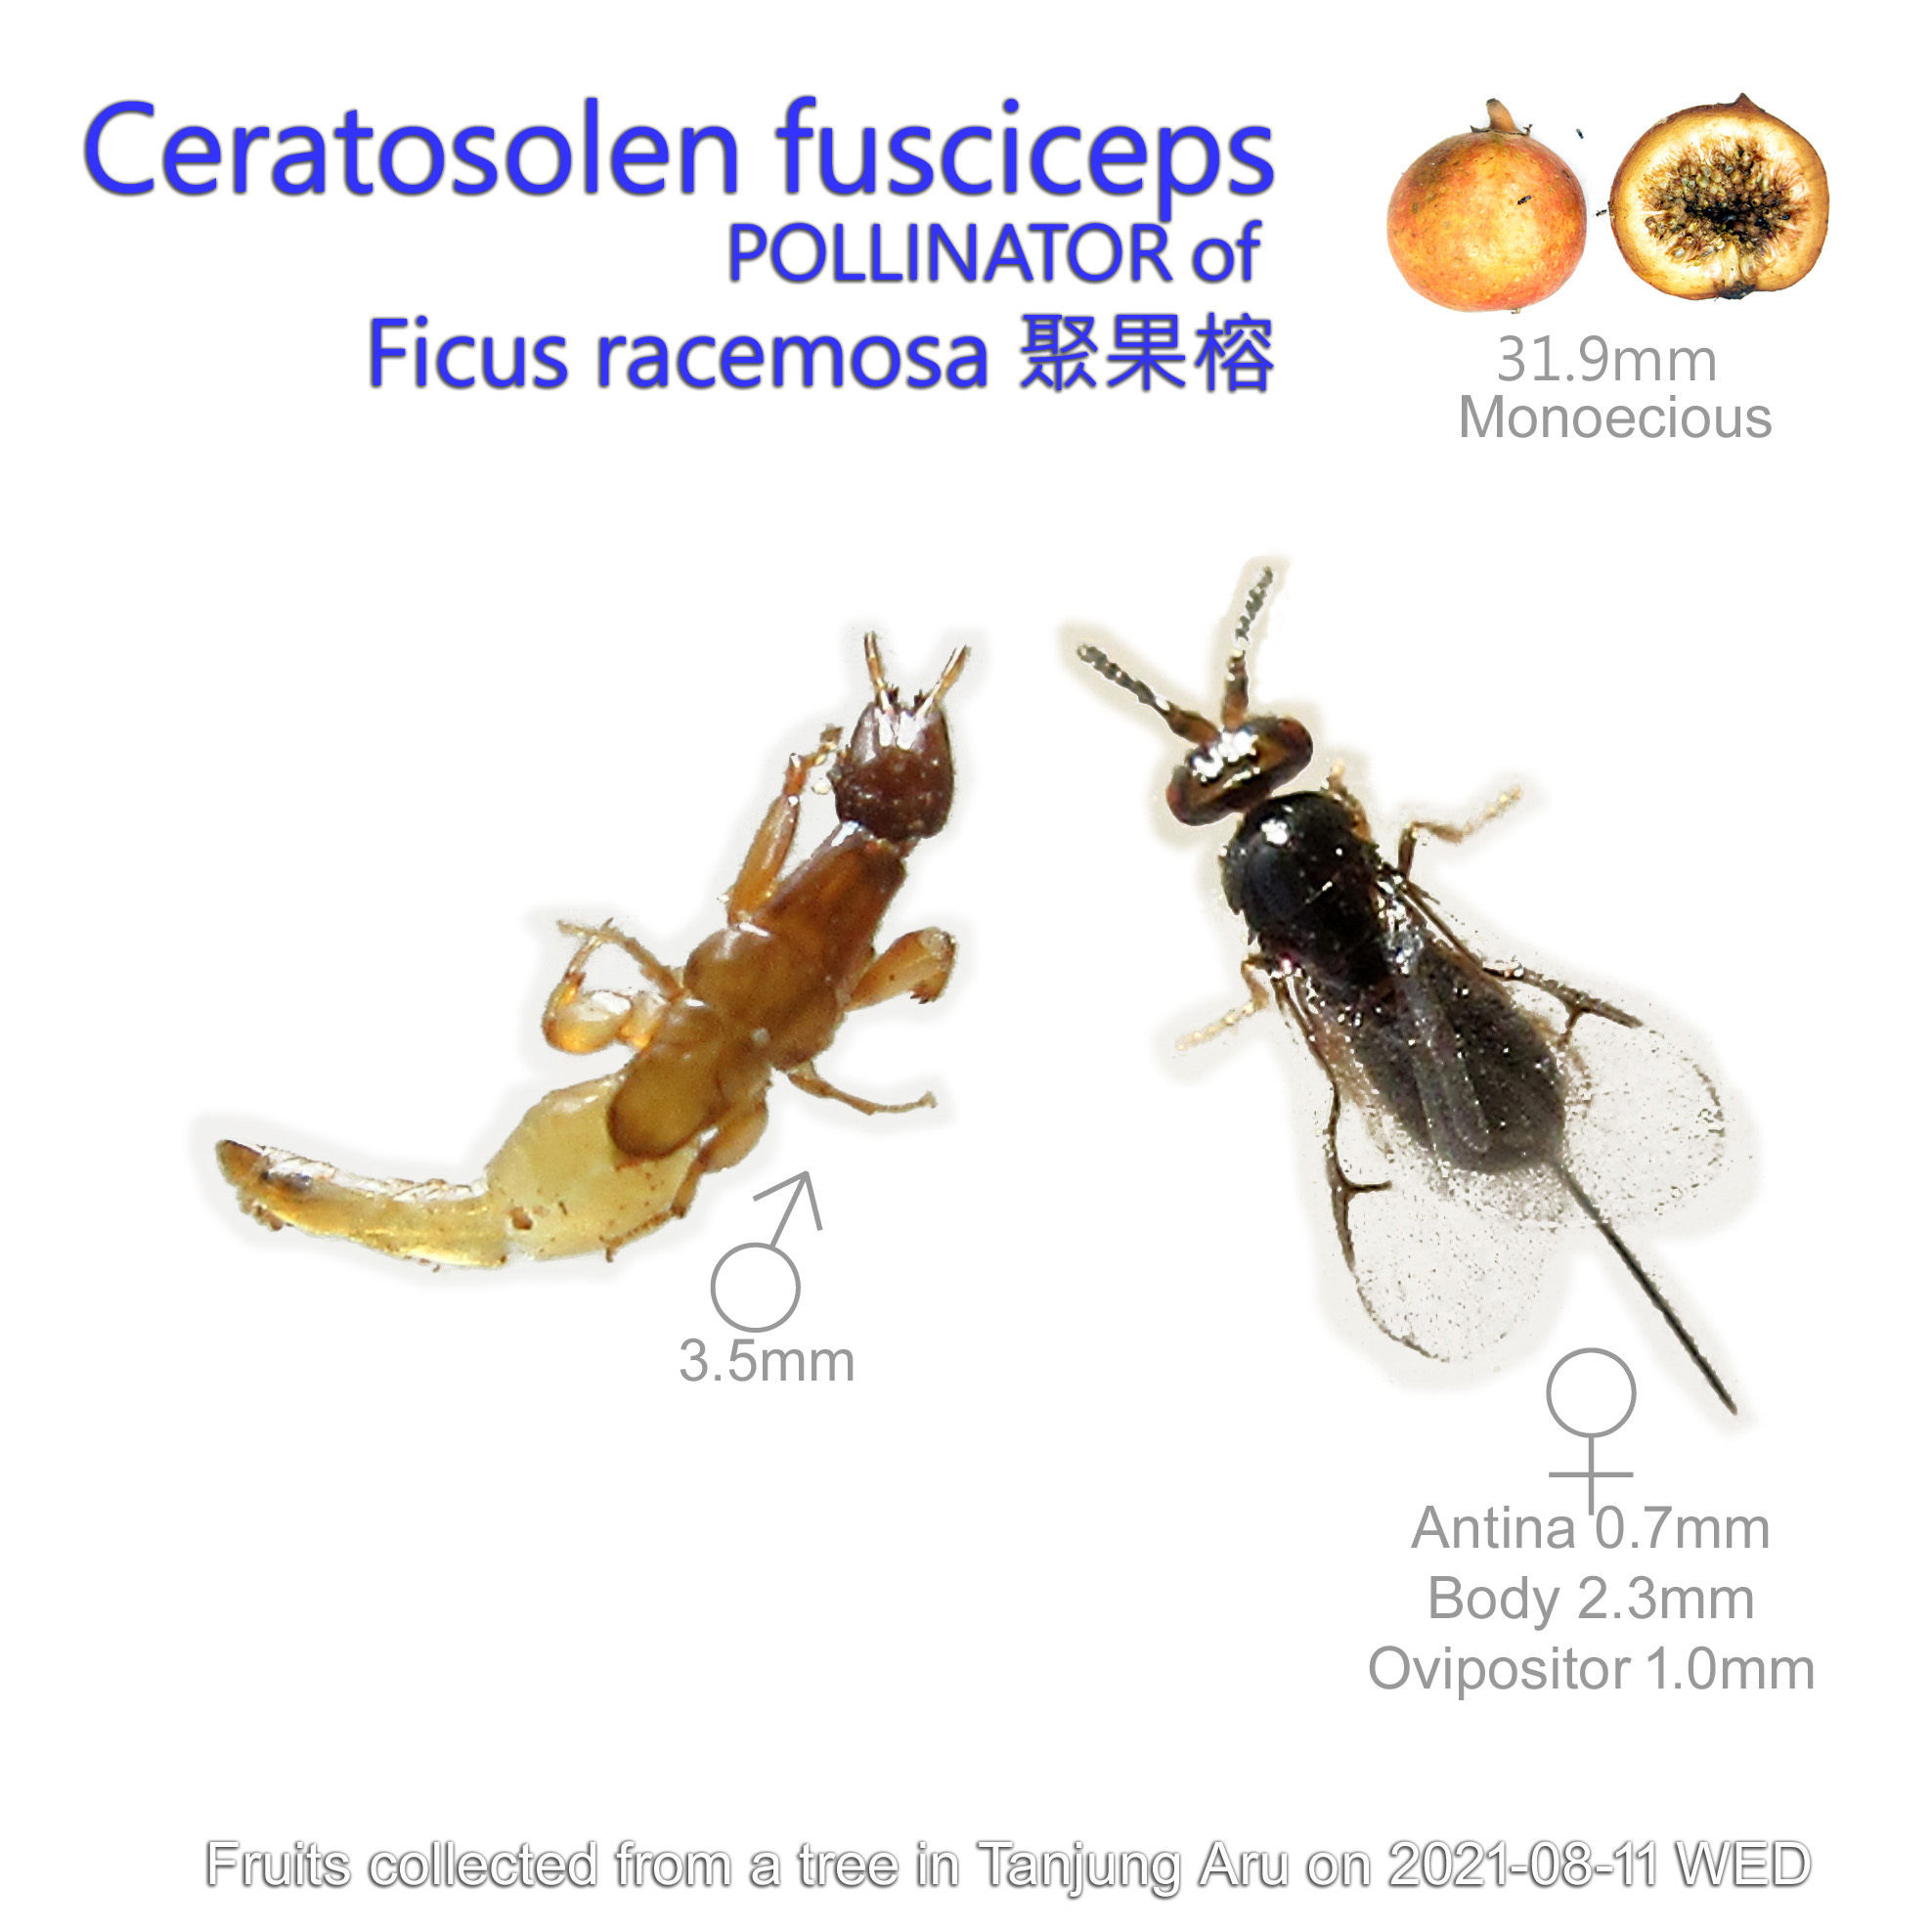 Ceratosolen fusciceps, the fig wasp pollinating Ficus racemosa, 